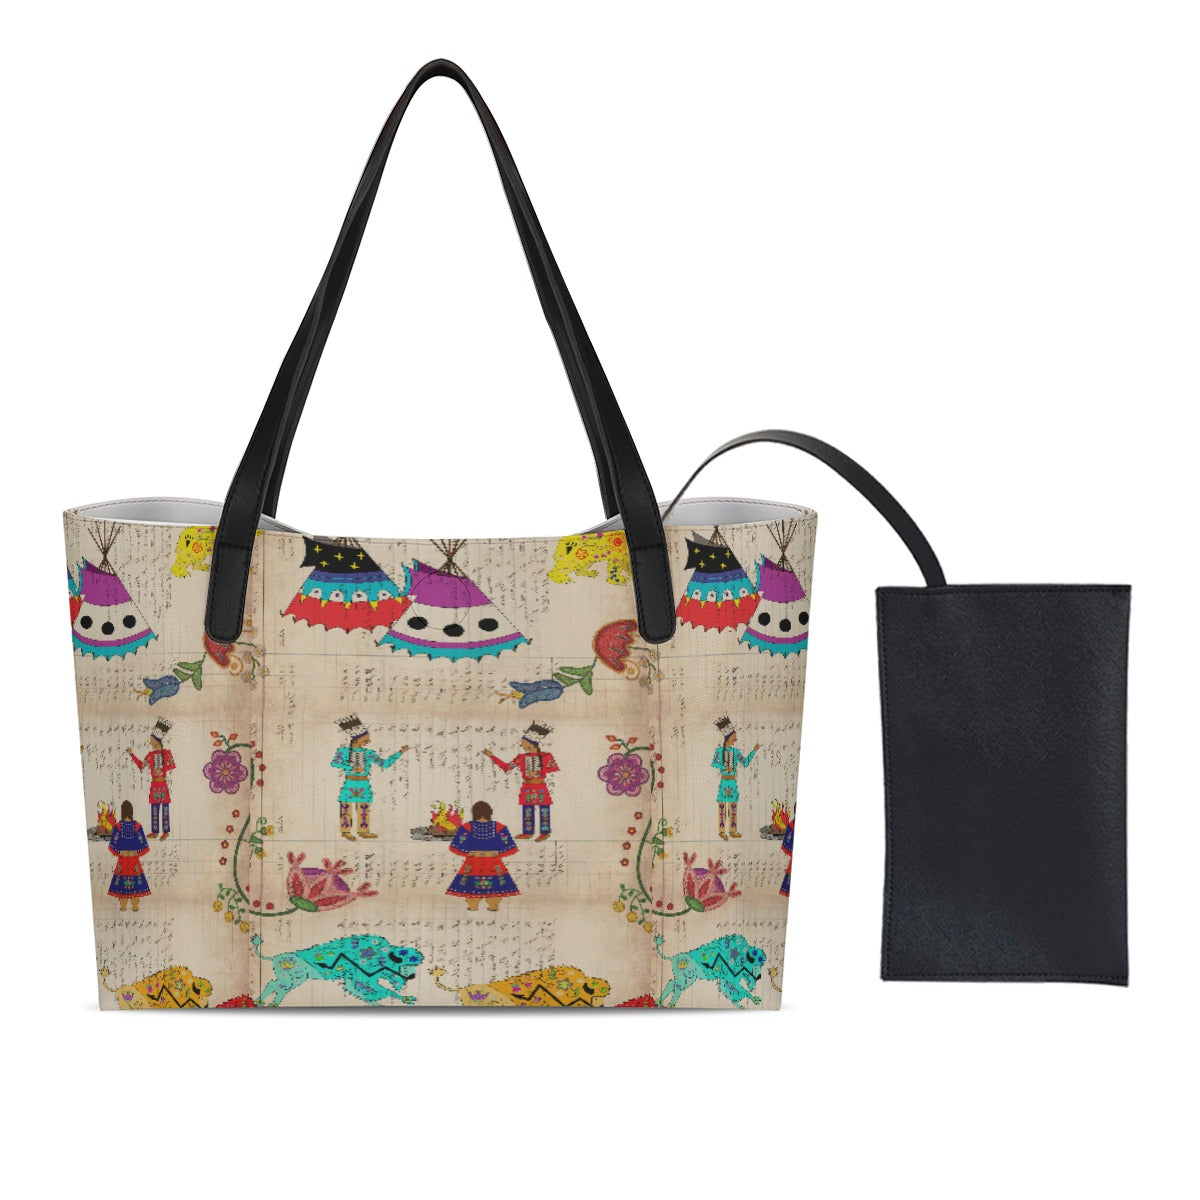 Floral Ledger Way of Life Shopping Tote Bag With Black Mini Purse